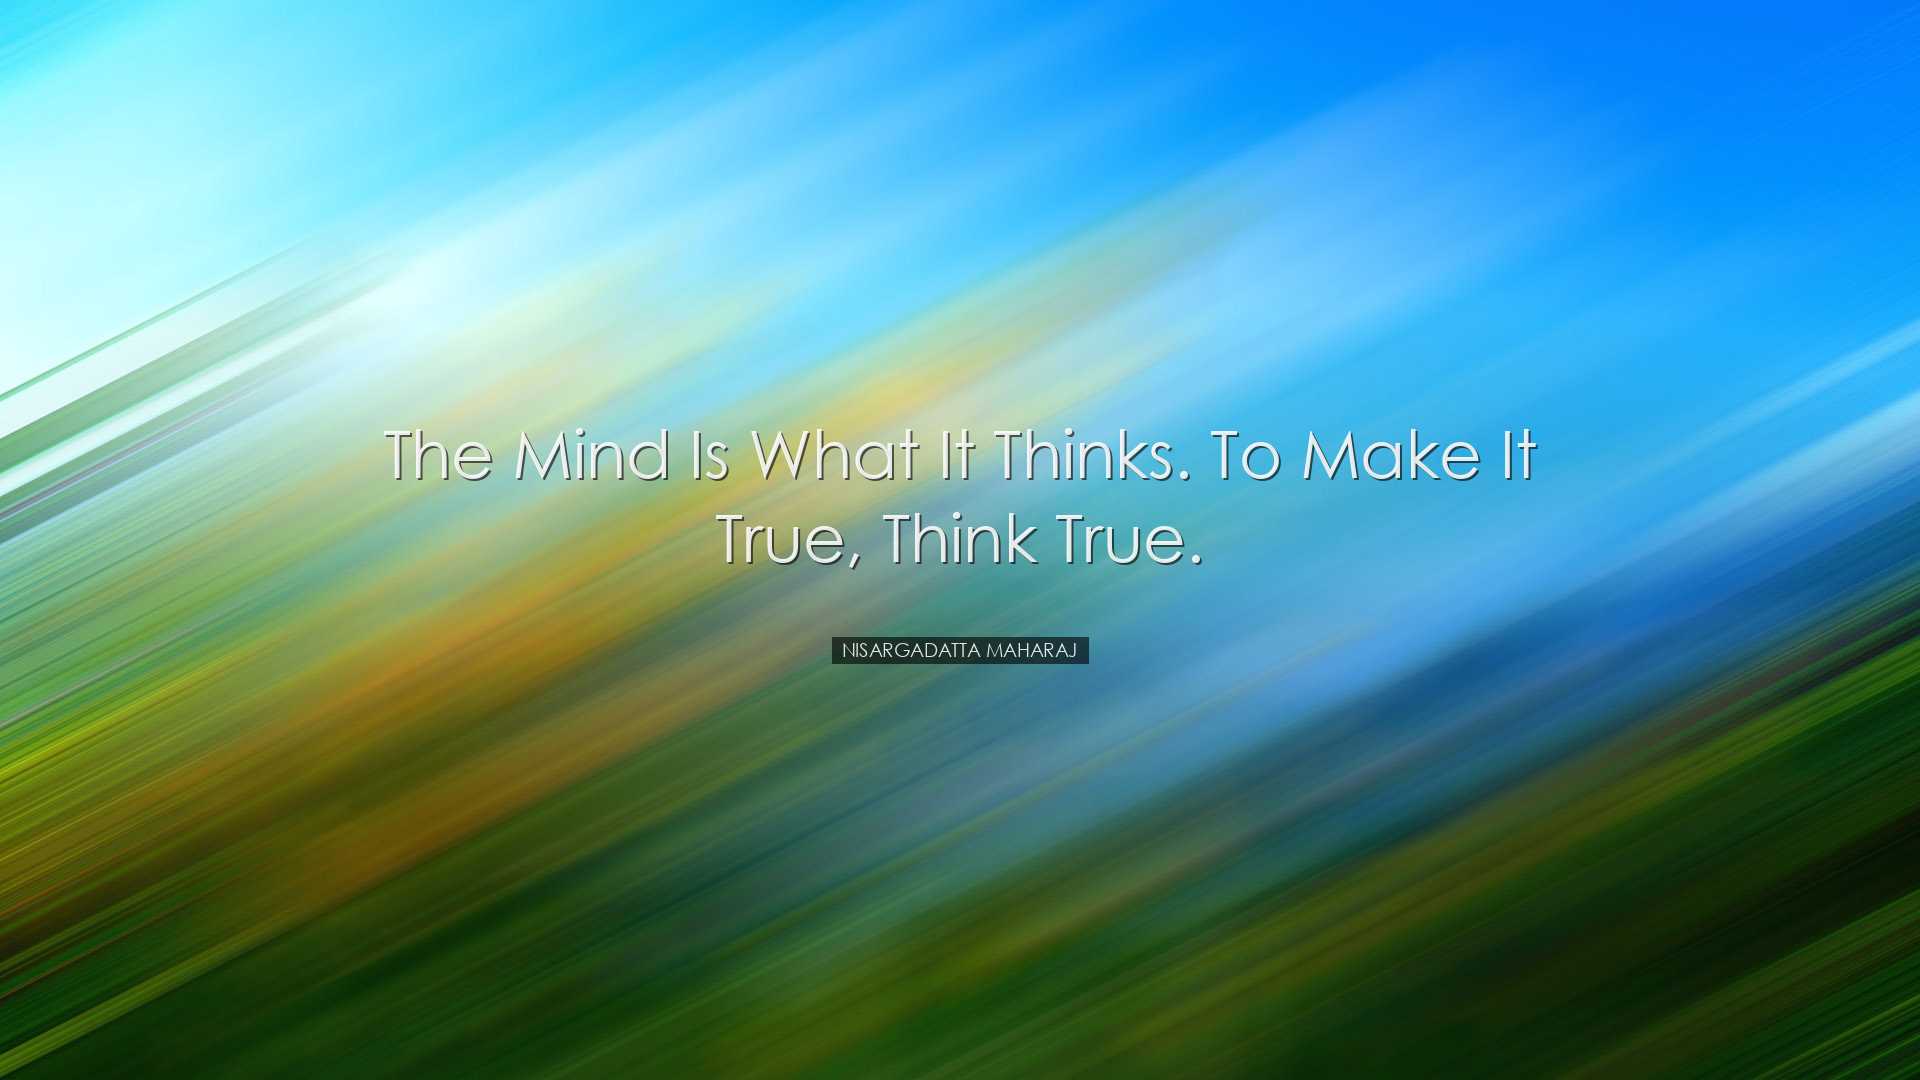 The mind is what it thinks. To make it true, think true. - Nisarga